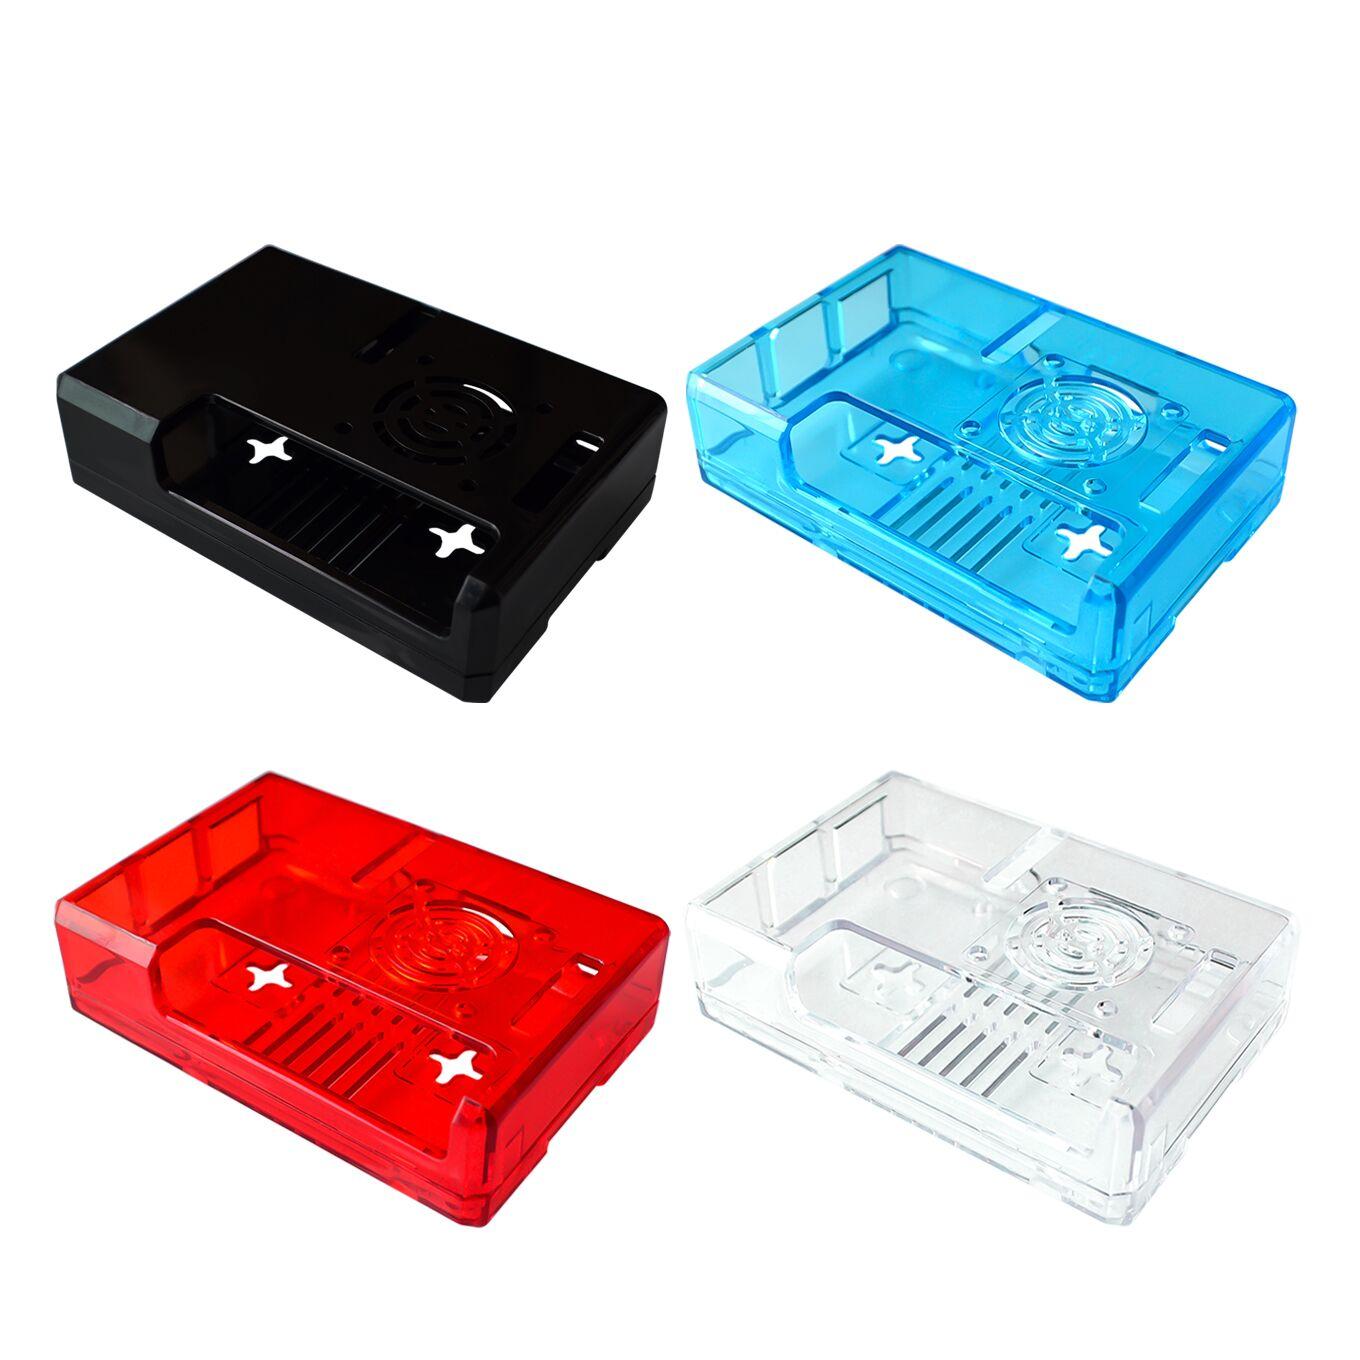 Raspberry Pi 3 Model B+ Plus ABS Case Black Transparent Blue Red ABS Plastic Box Closed Cover Shell for Raspberry Pi 3B/2